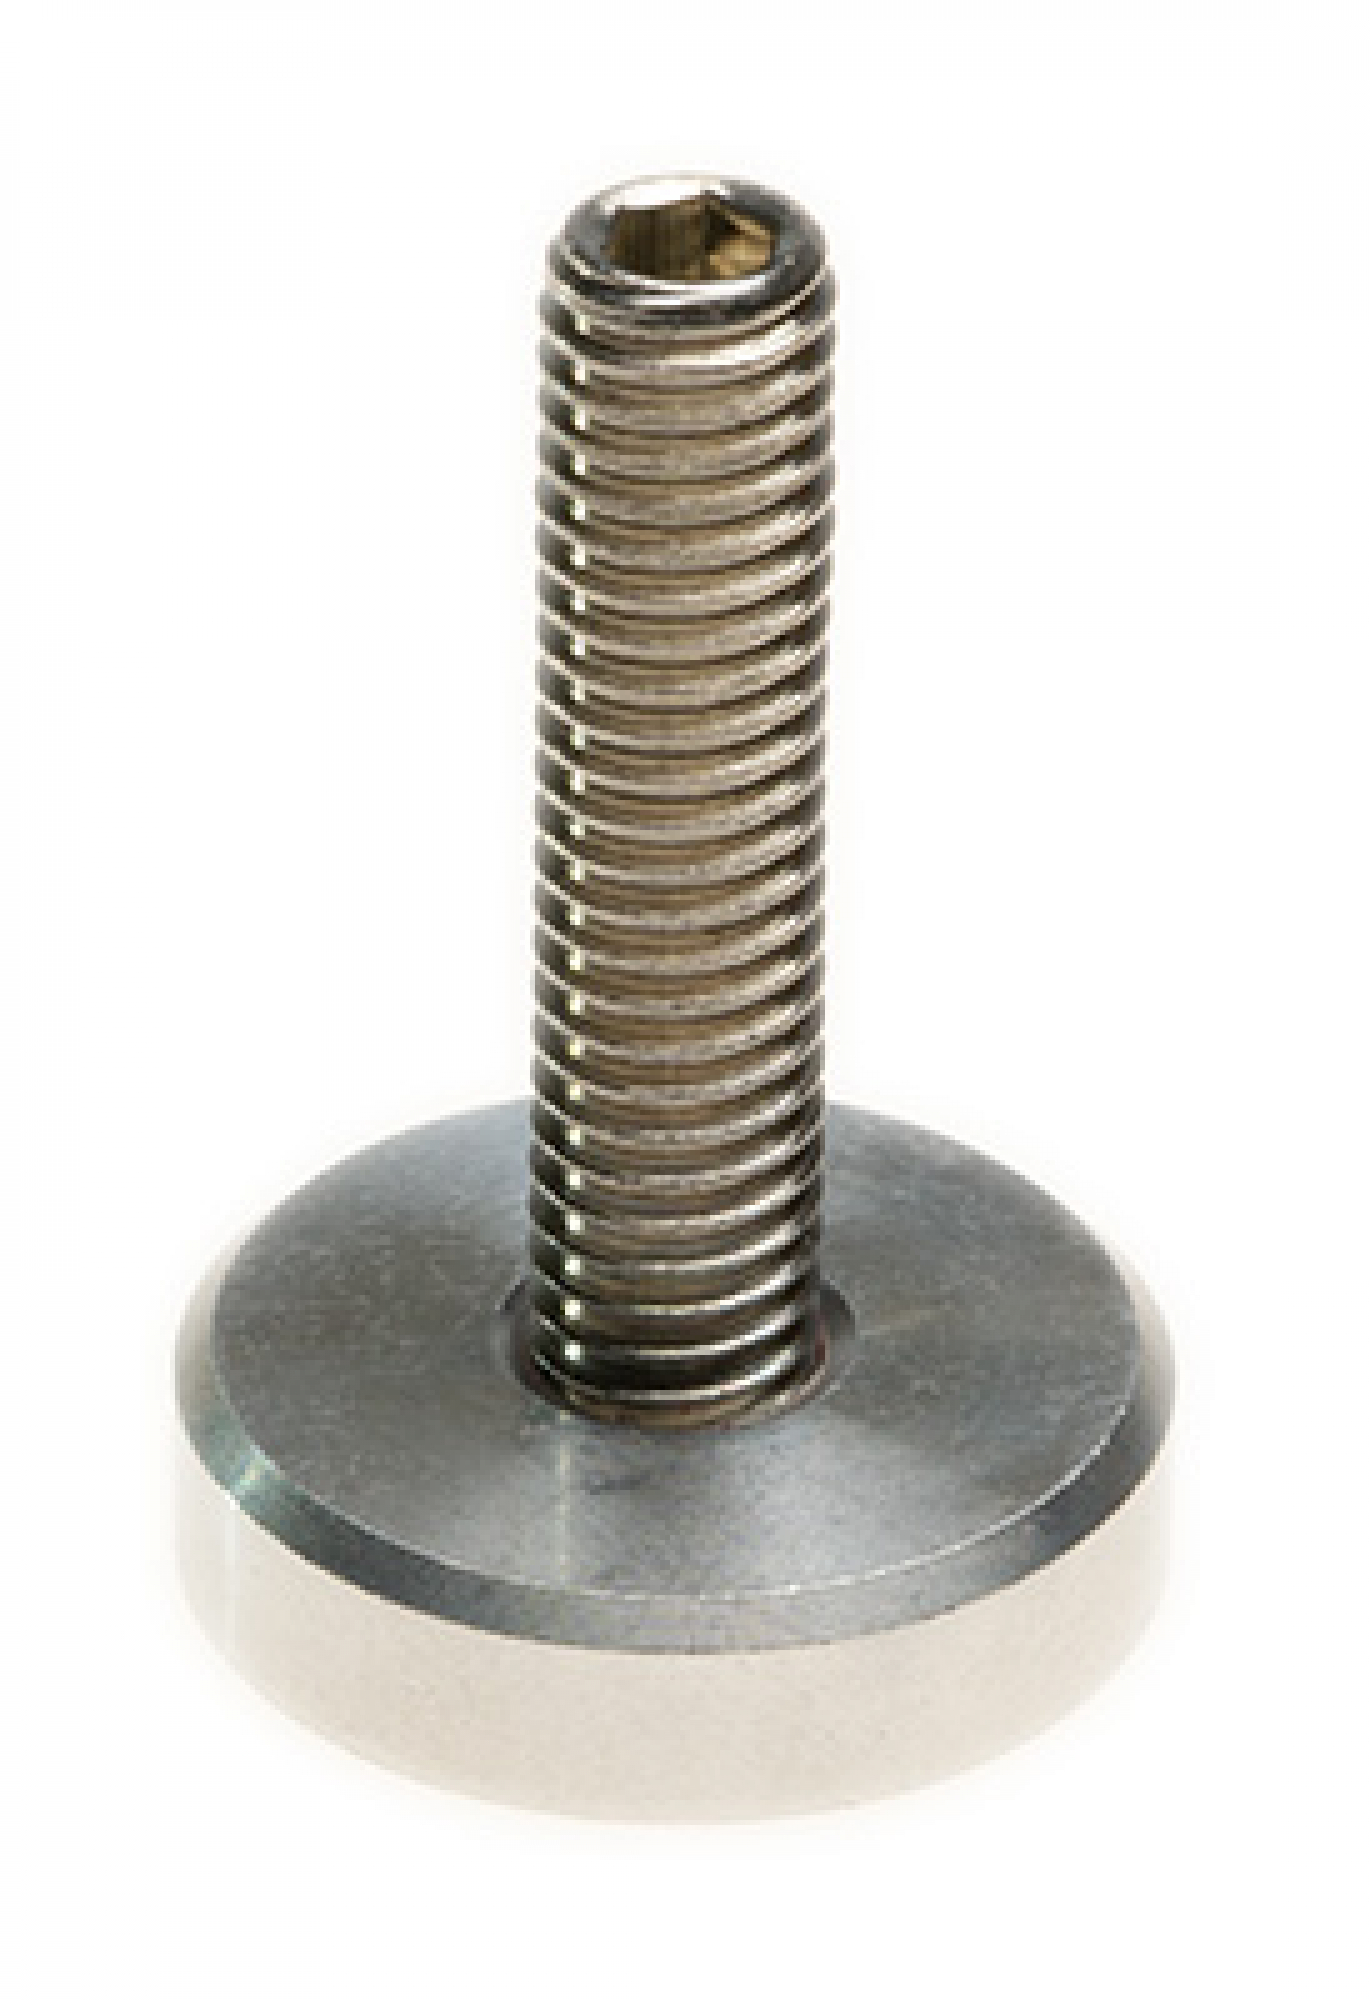 Screw base for clamp M6, M6 x 30, single